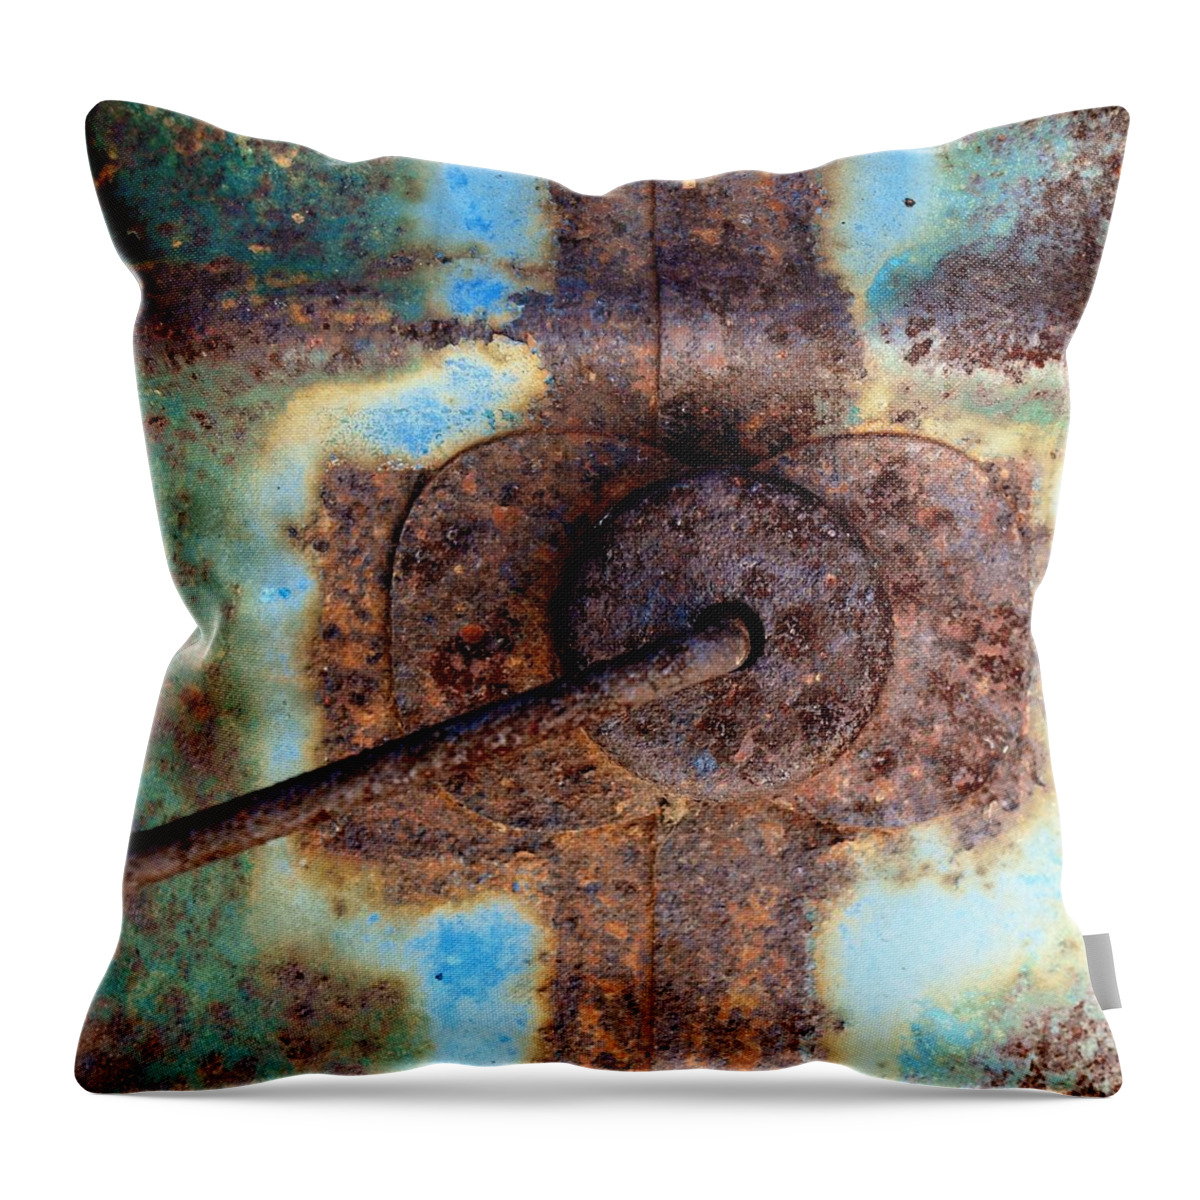 Raw Steel 3 Throw Pillow featuring the photograph Raw Steel 3 by Tom Druin